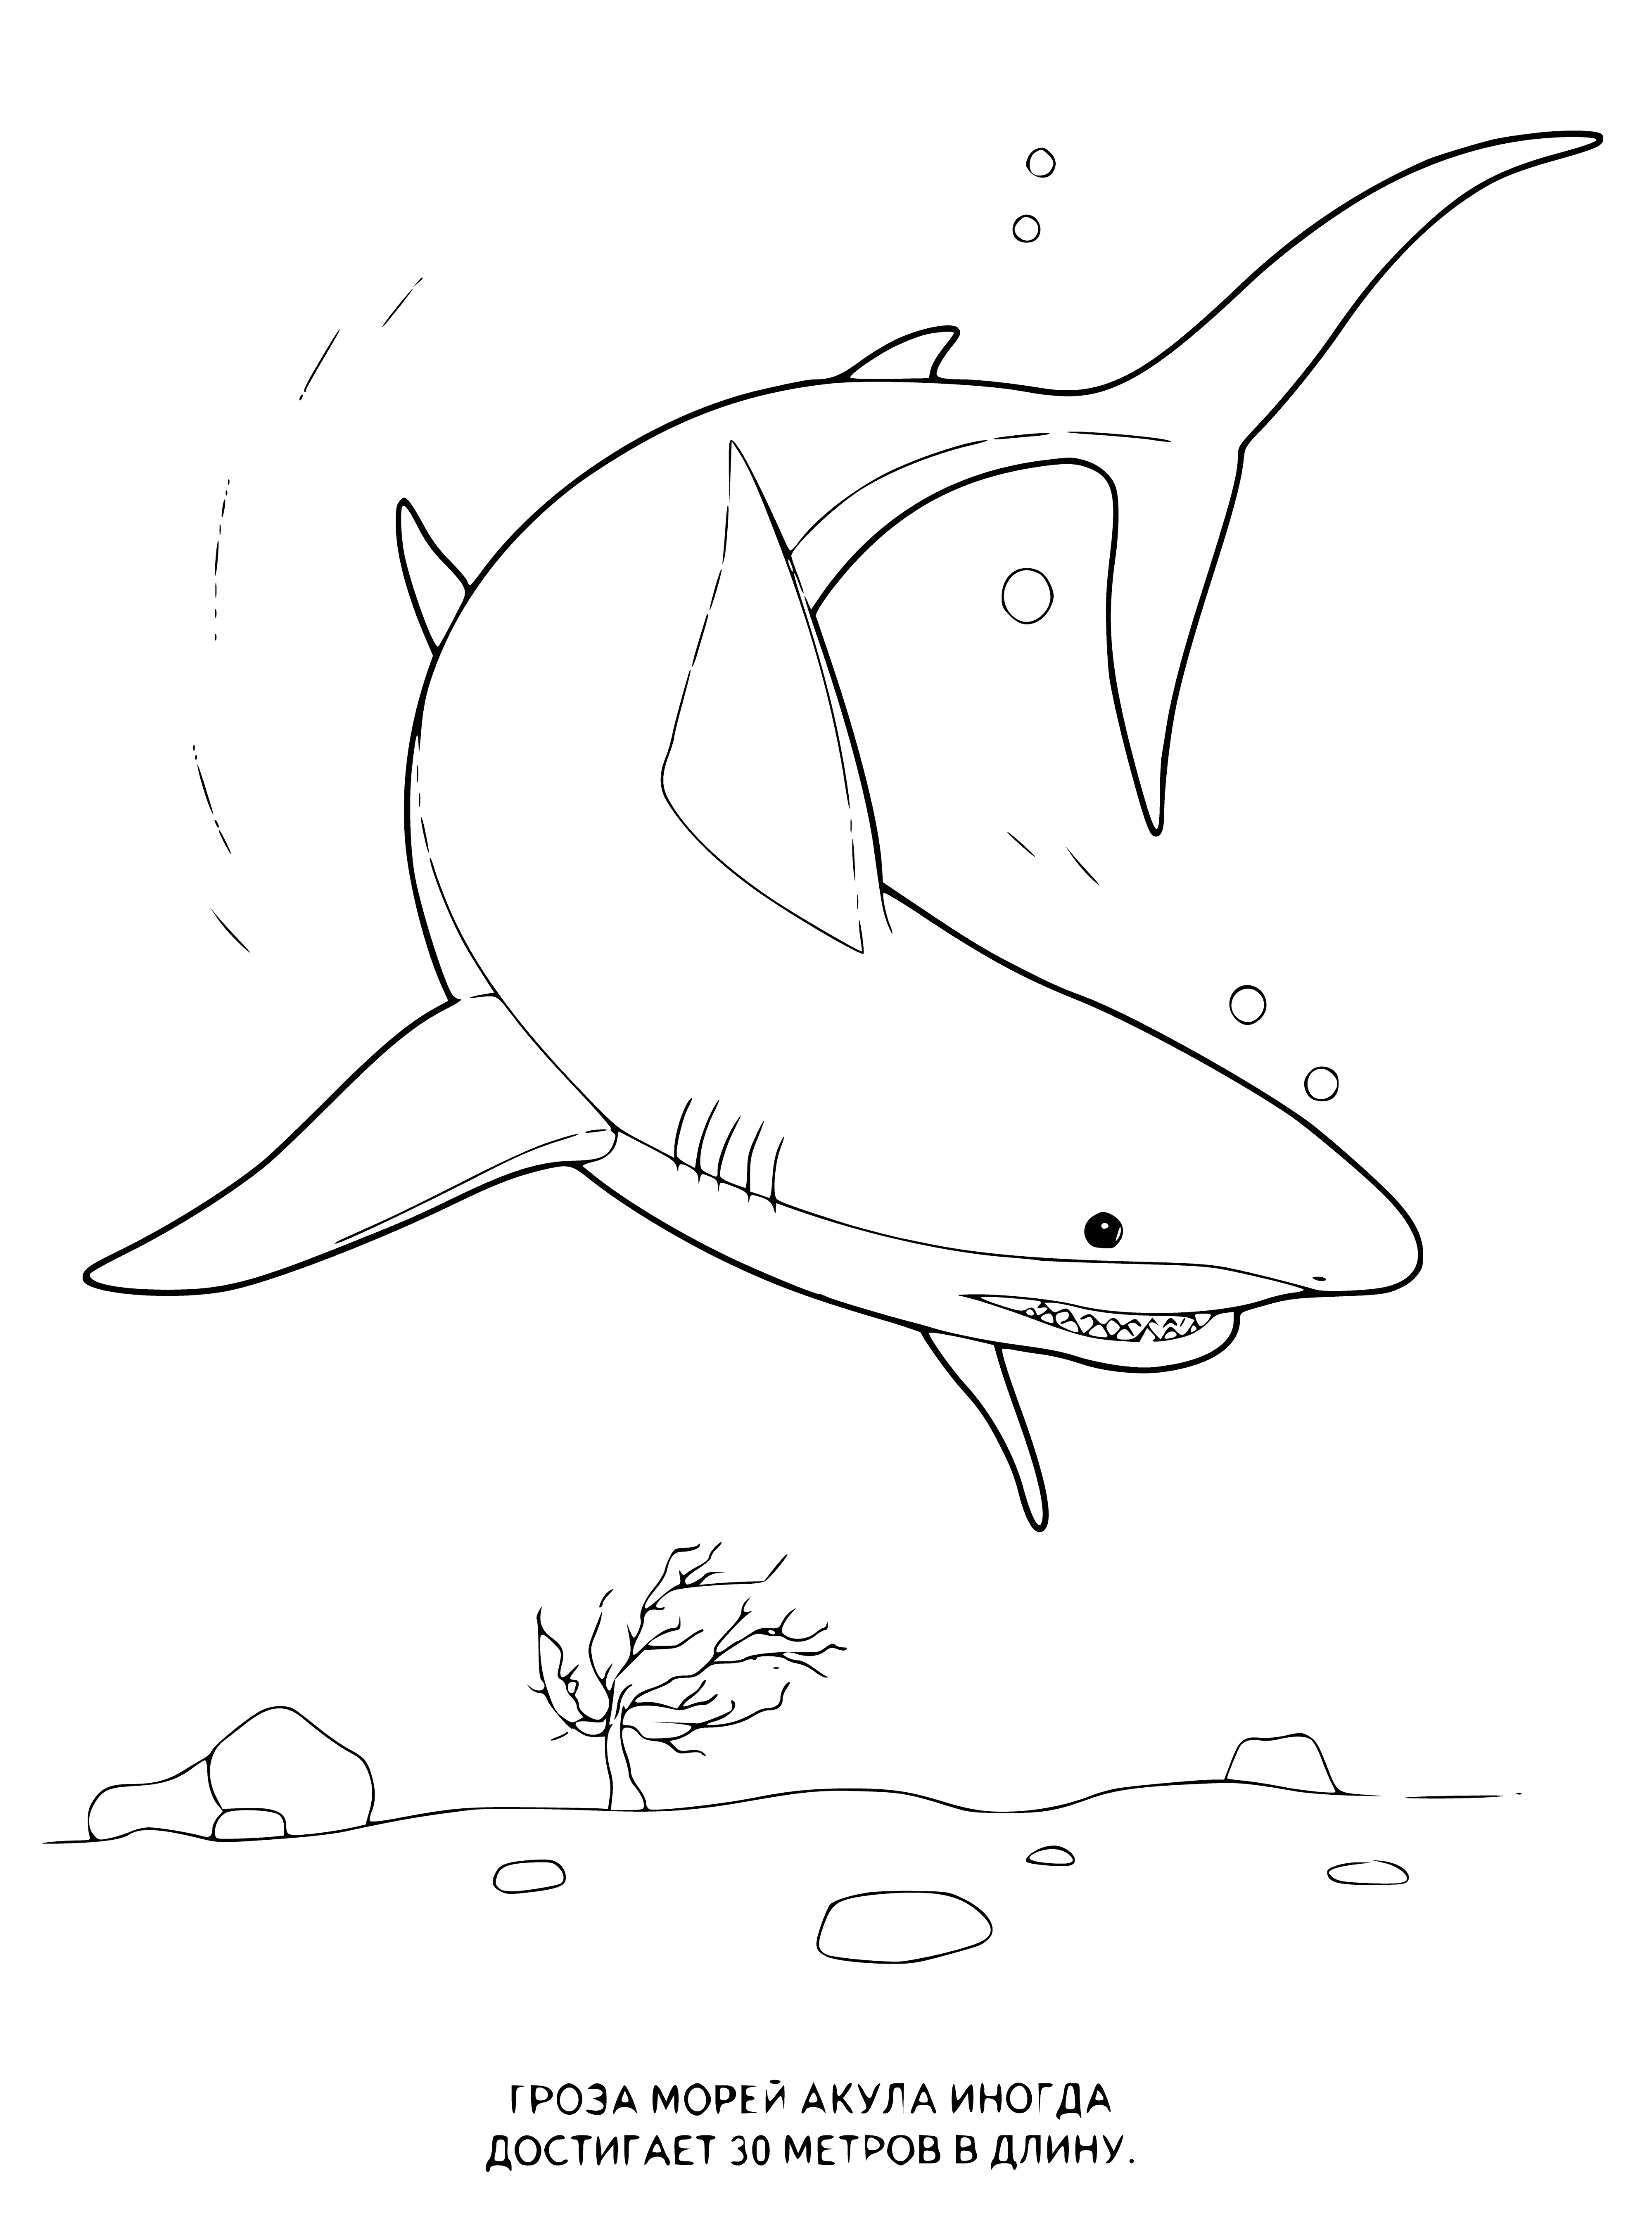 coloring page: Large, gray shark with long nose & pointed fins, body covered in sharp teeth, swimming quickly through the water.